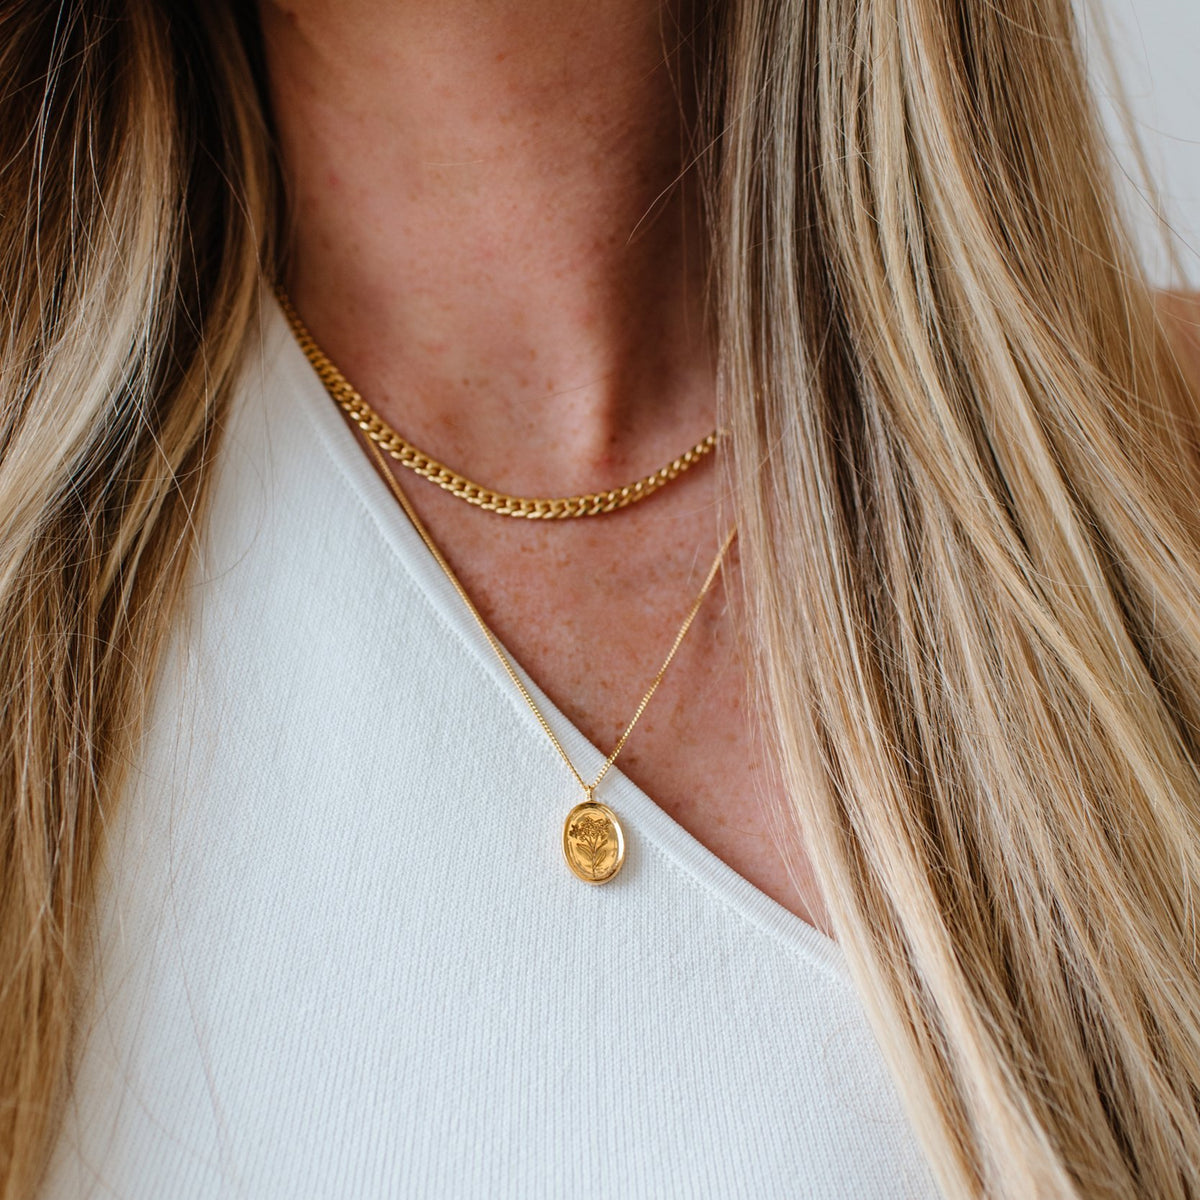 FRAICHE INSPIRE FORGET ME NOT NECKLACE - GOLD - SO PRETTY CARA COTTER